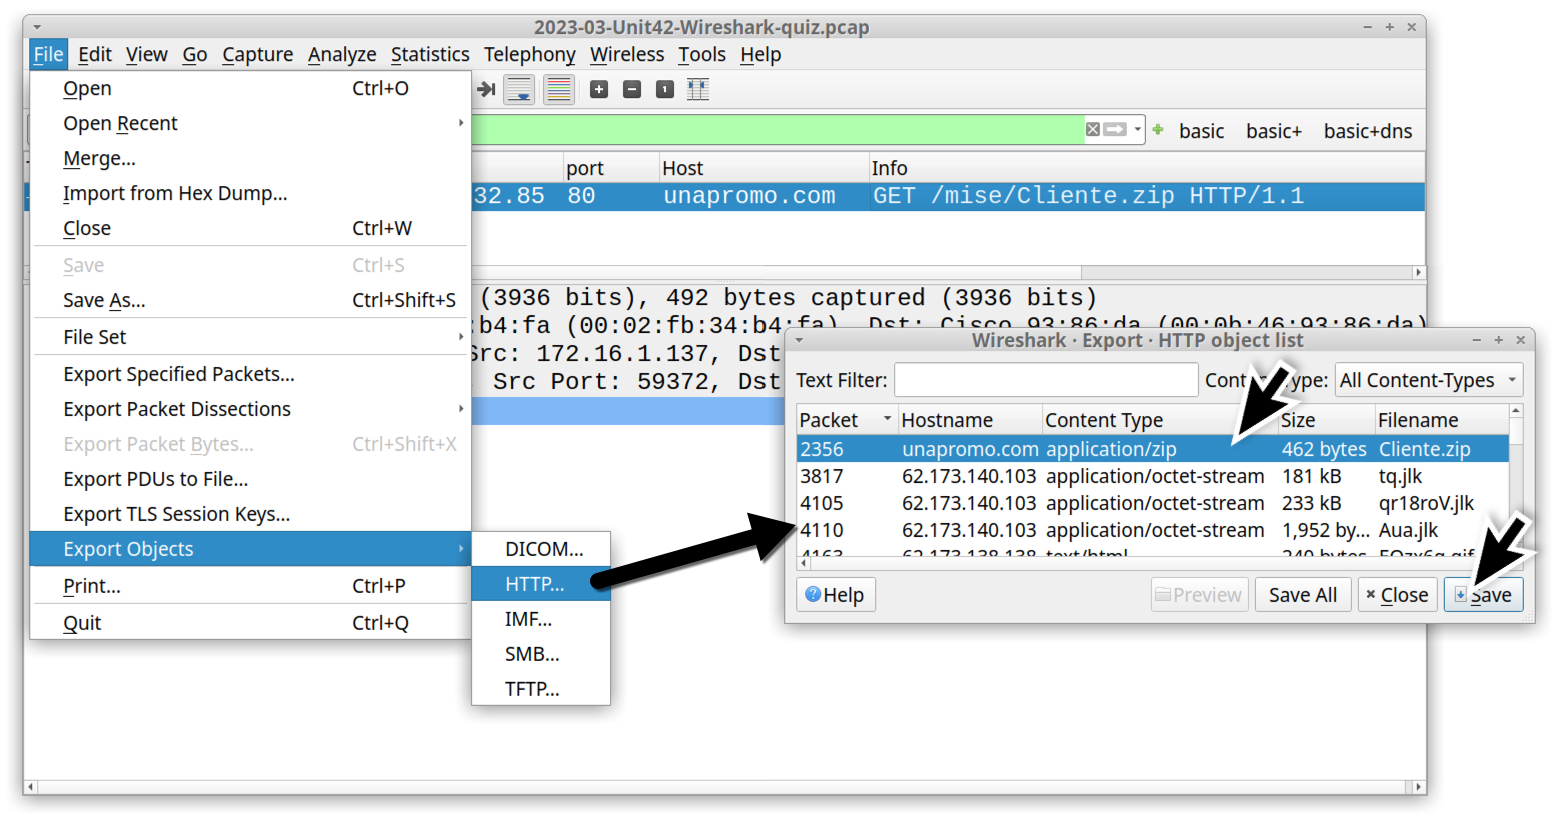 Image 5 is a screenshot of Wireshark showing how to export the ZIP file from Export Objects in the File menu. 